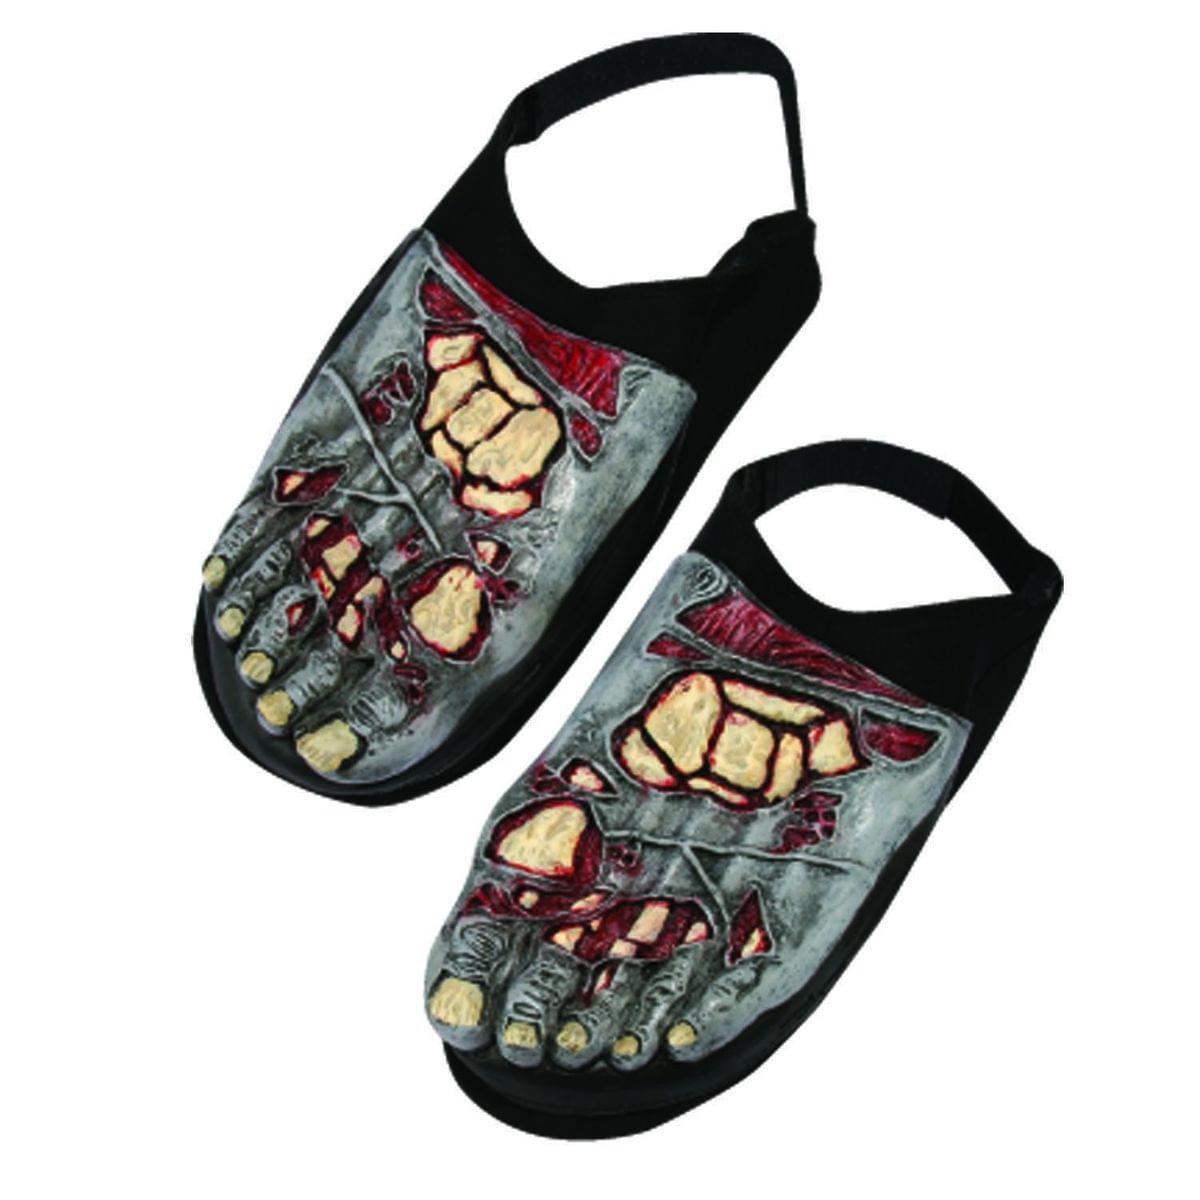 Zombie Bone Foot Covers Costume Accessory Adult